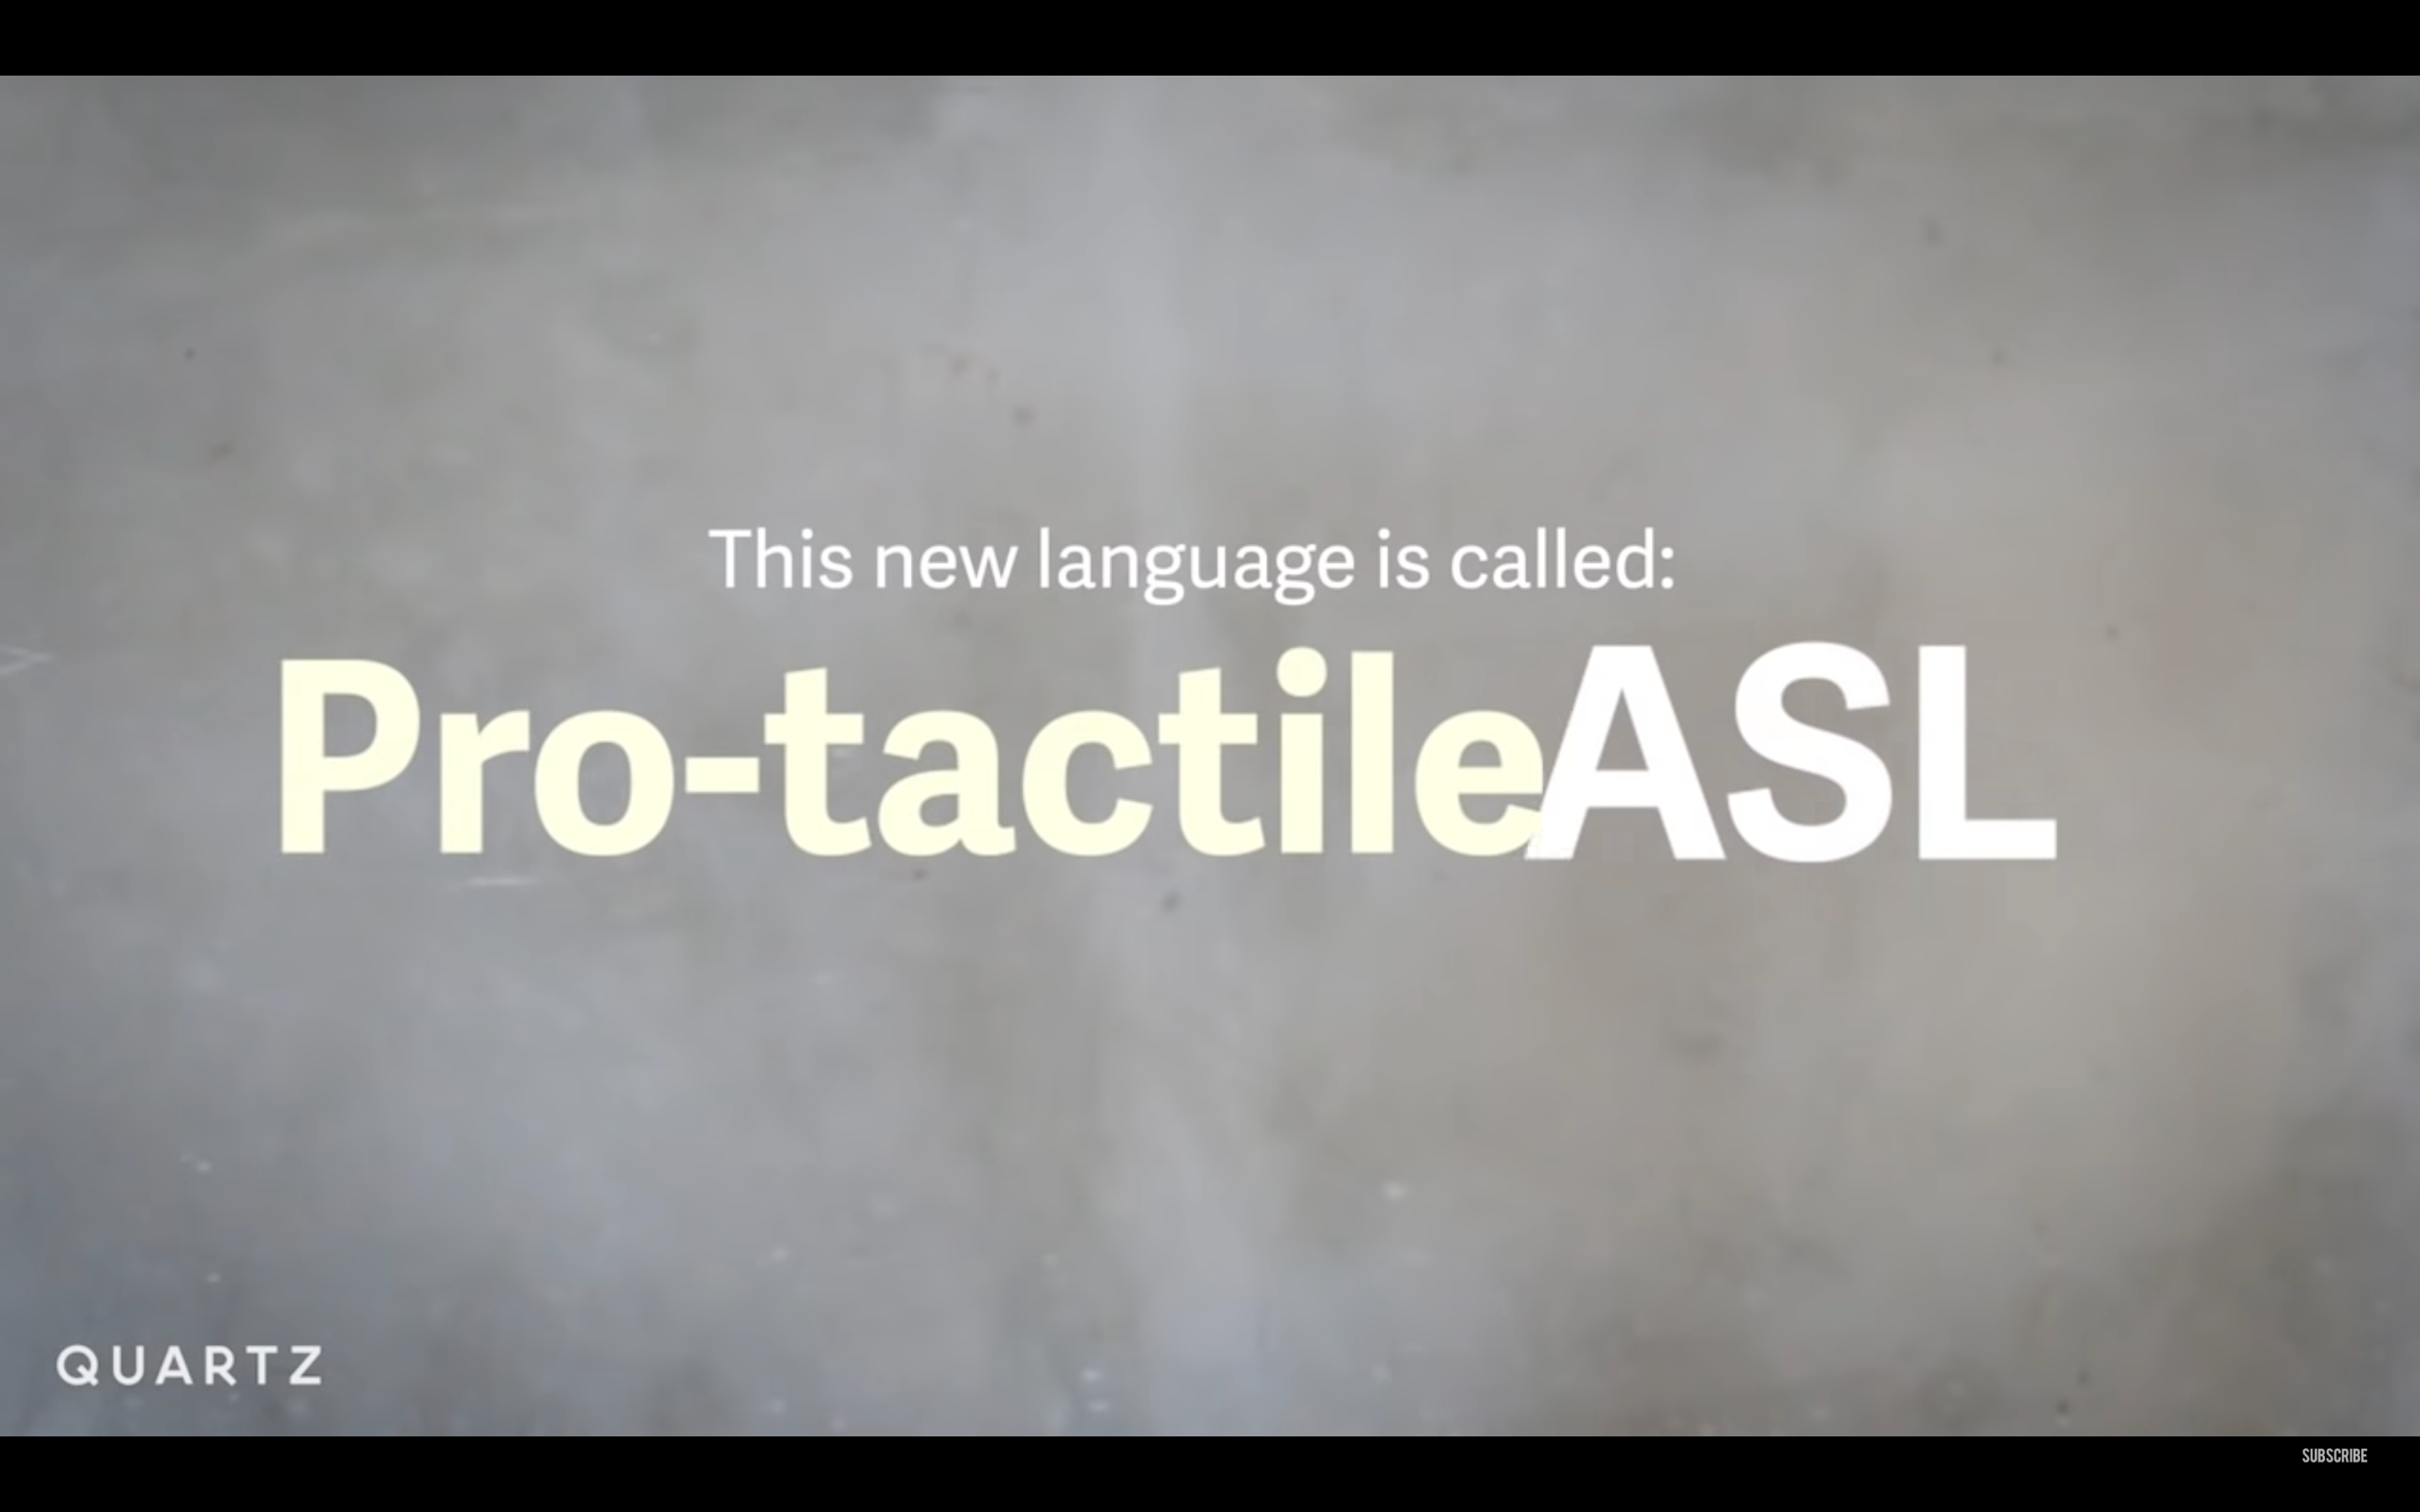 Pro-tactile ASL: A new language for the DeafBlind